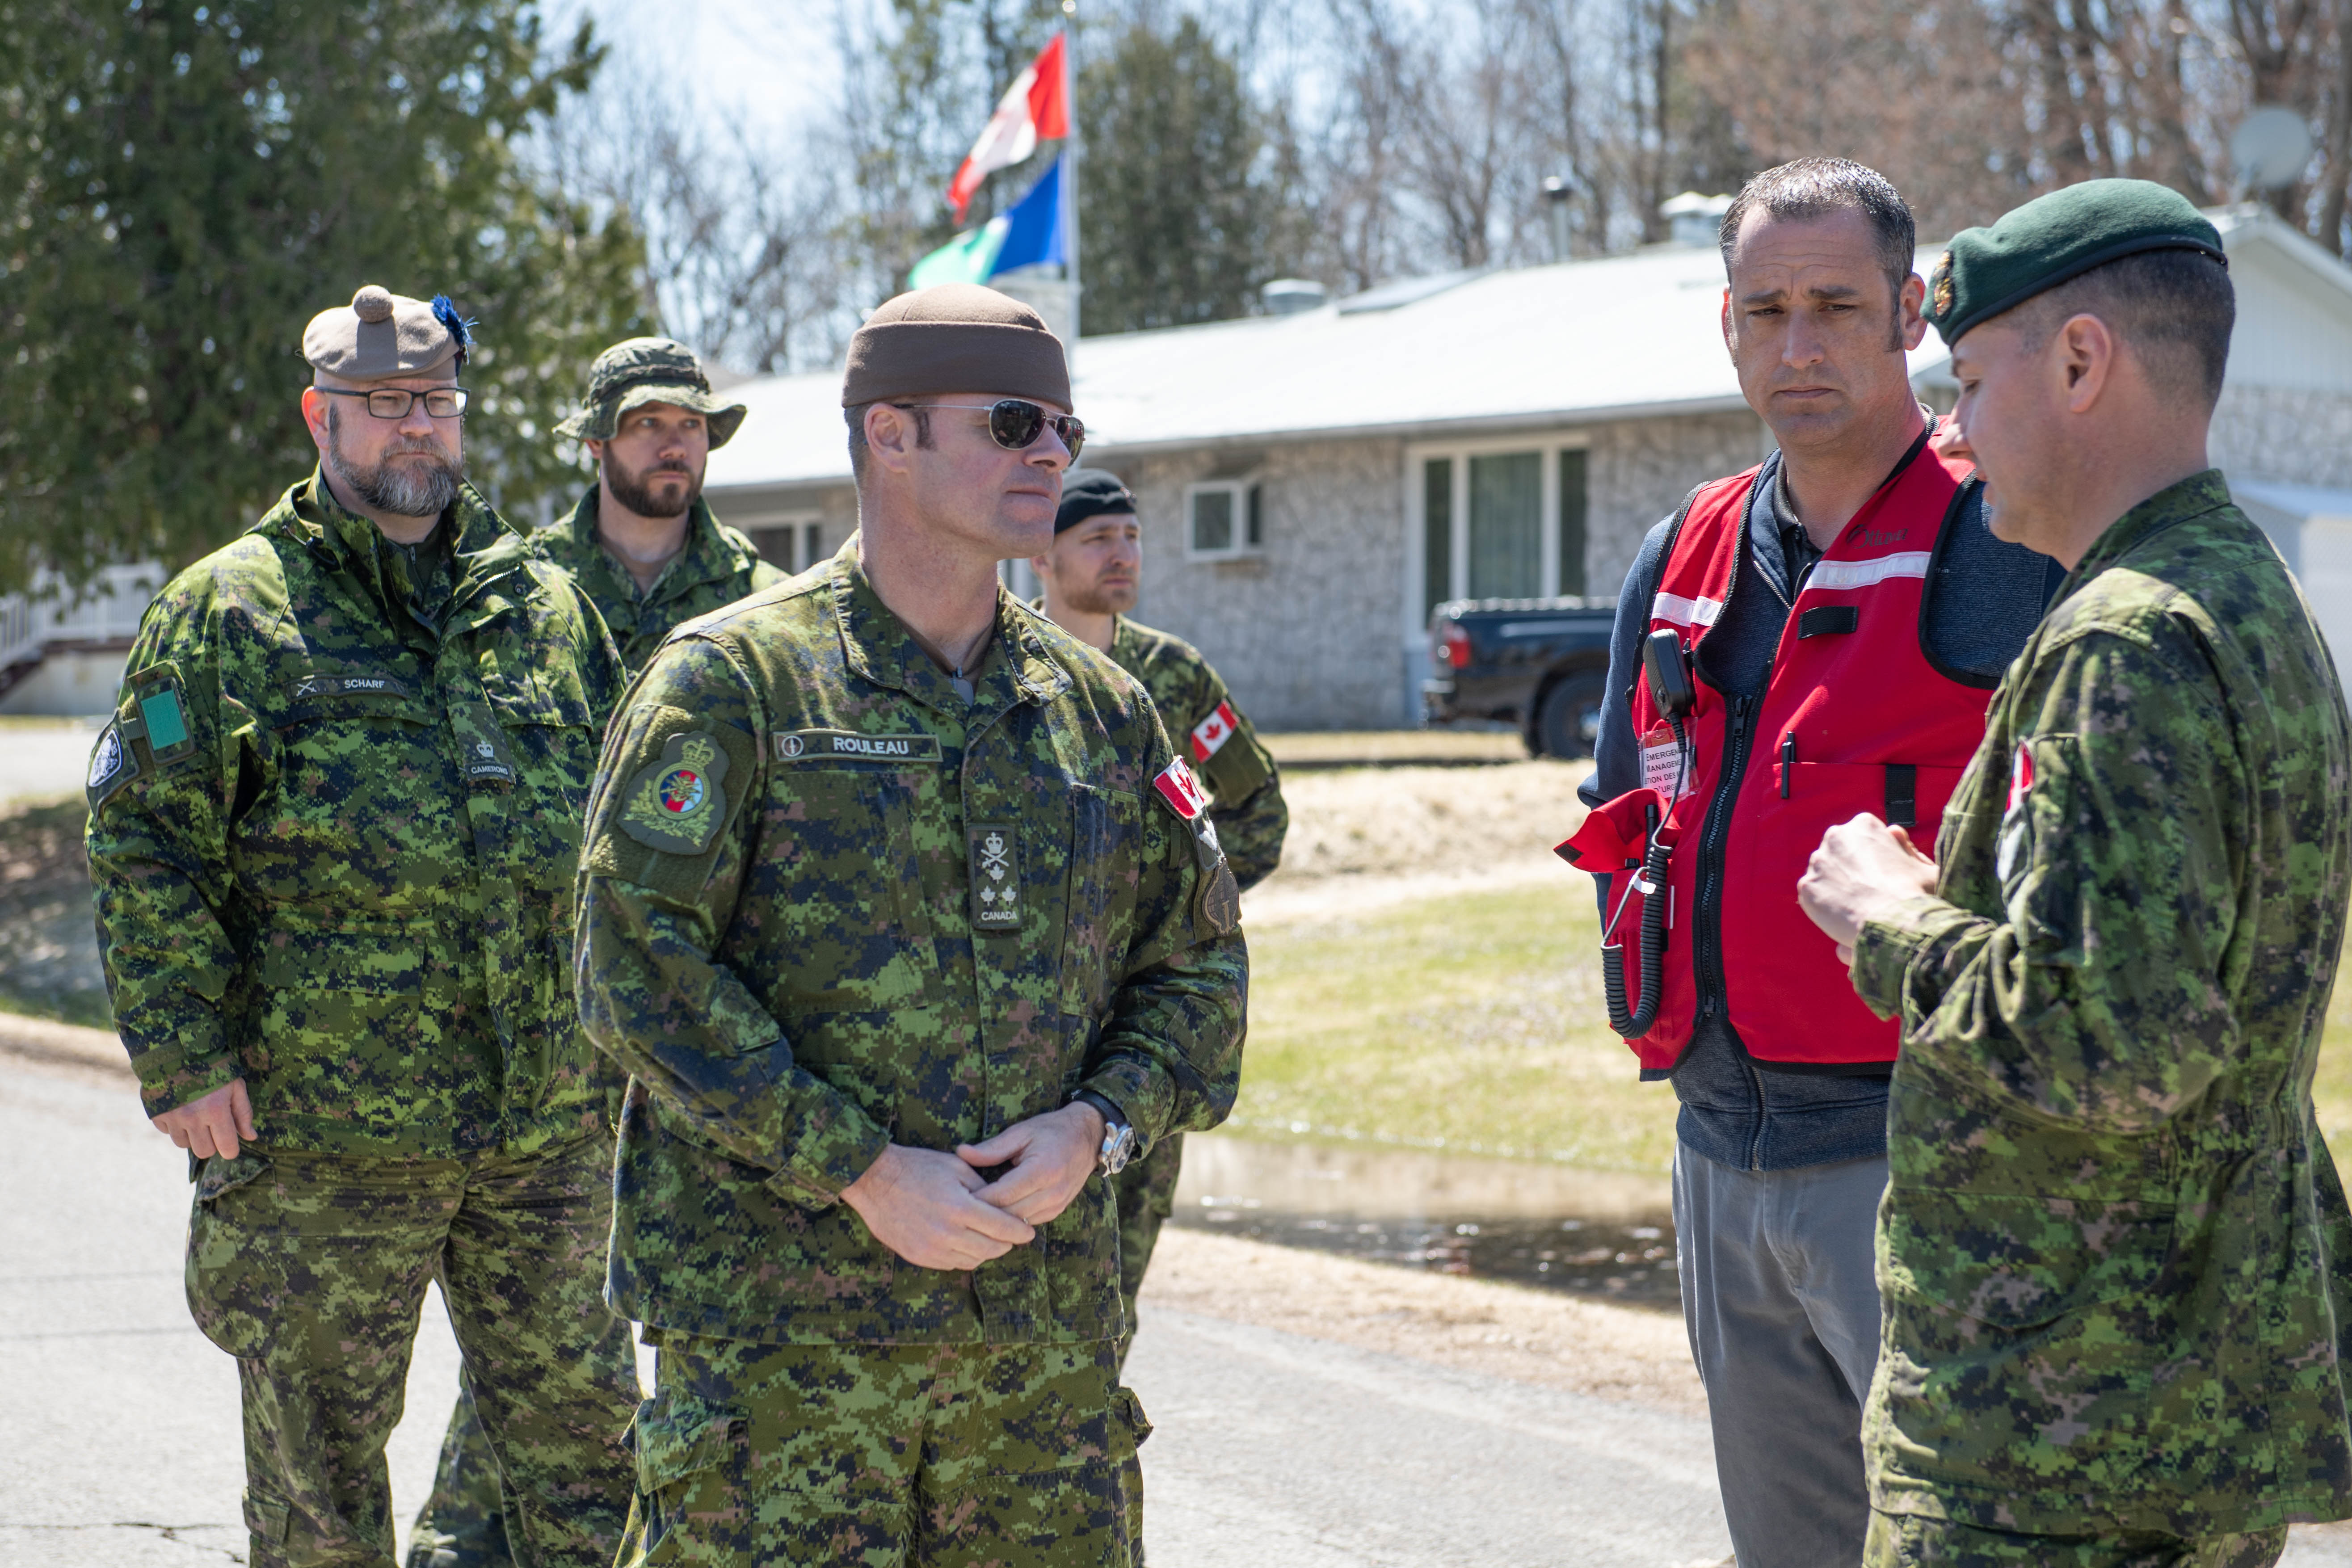 Lieutenant-General Michael Rouleau visits Canadian Armed Forces members assisting with flood relief operations in Rockland, Ontario during Operation LENTUS on April 28, 2019. Master Corporal Donnie McDonald, 4 Canadian Division PA